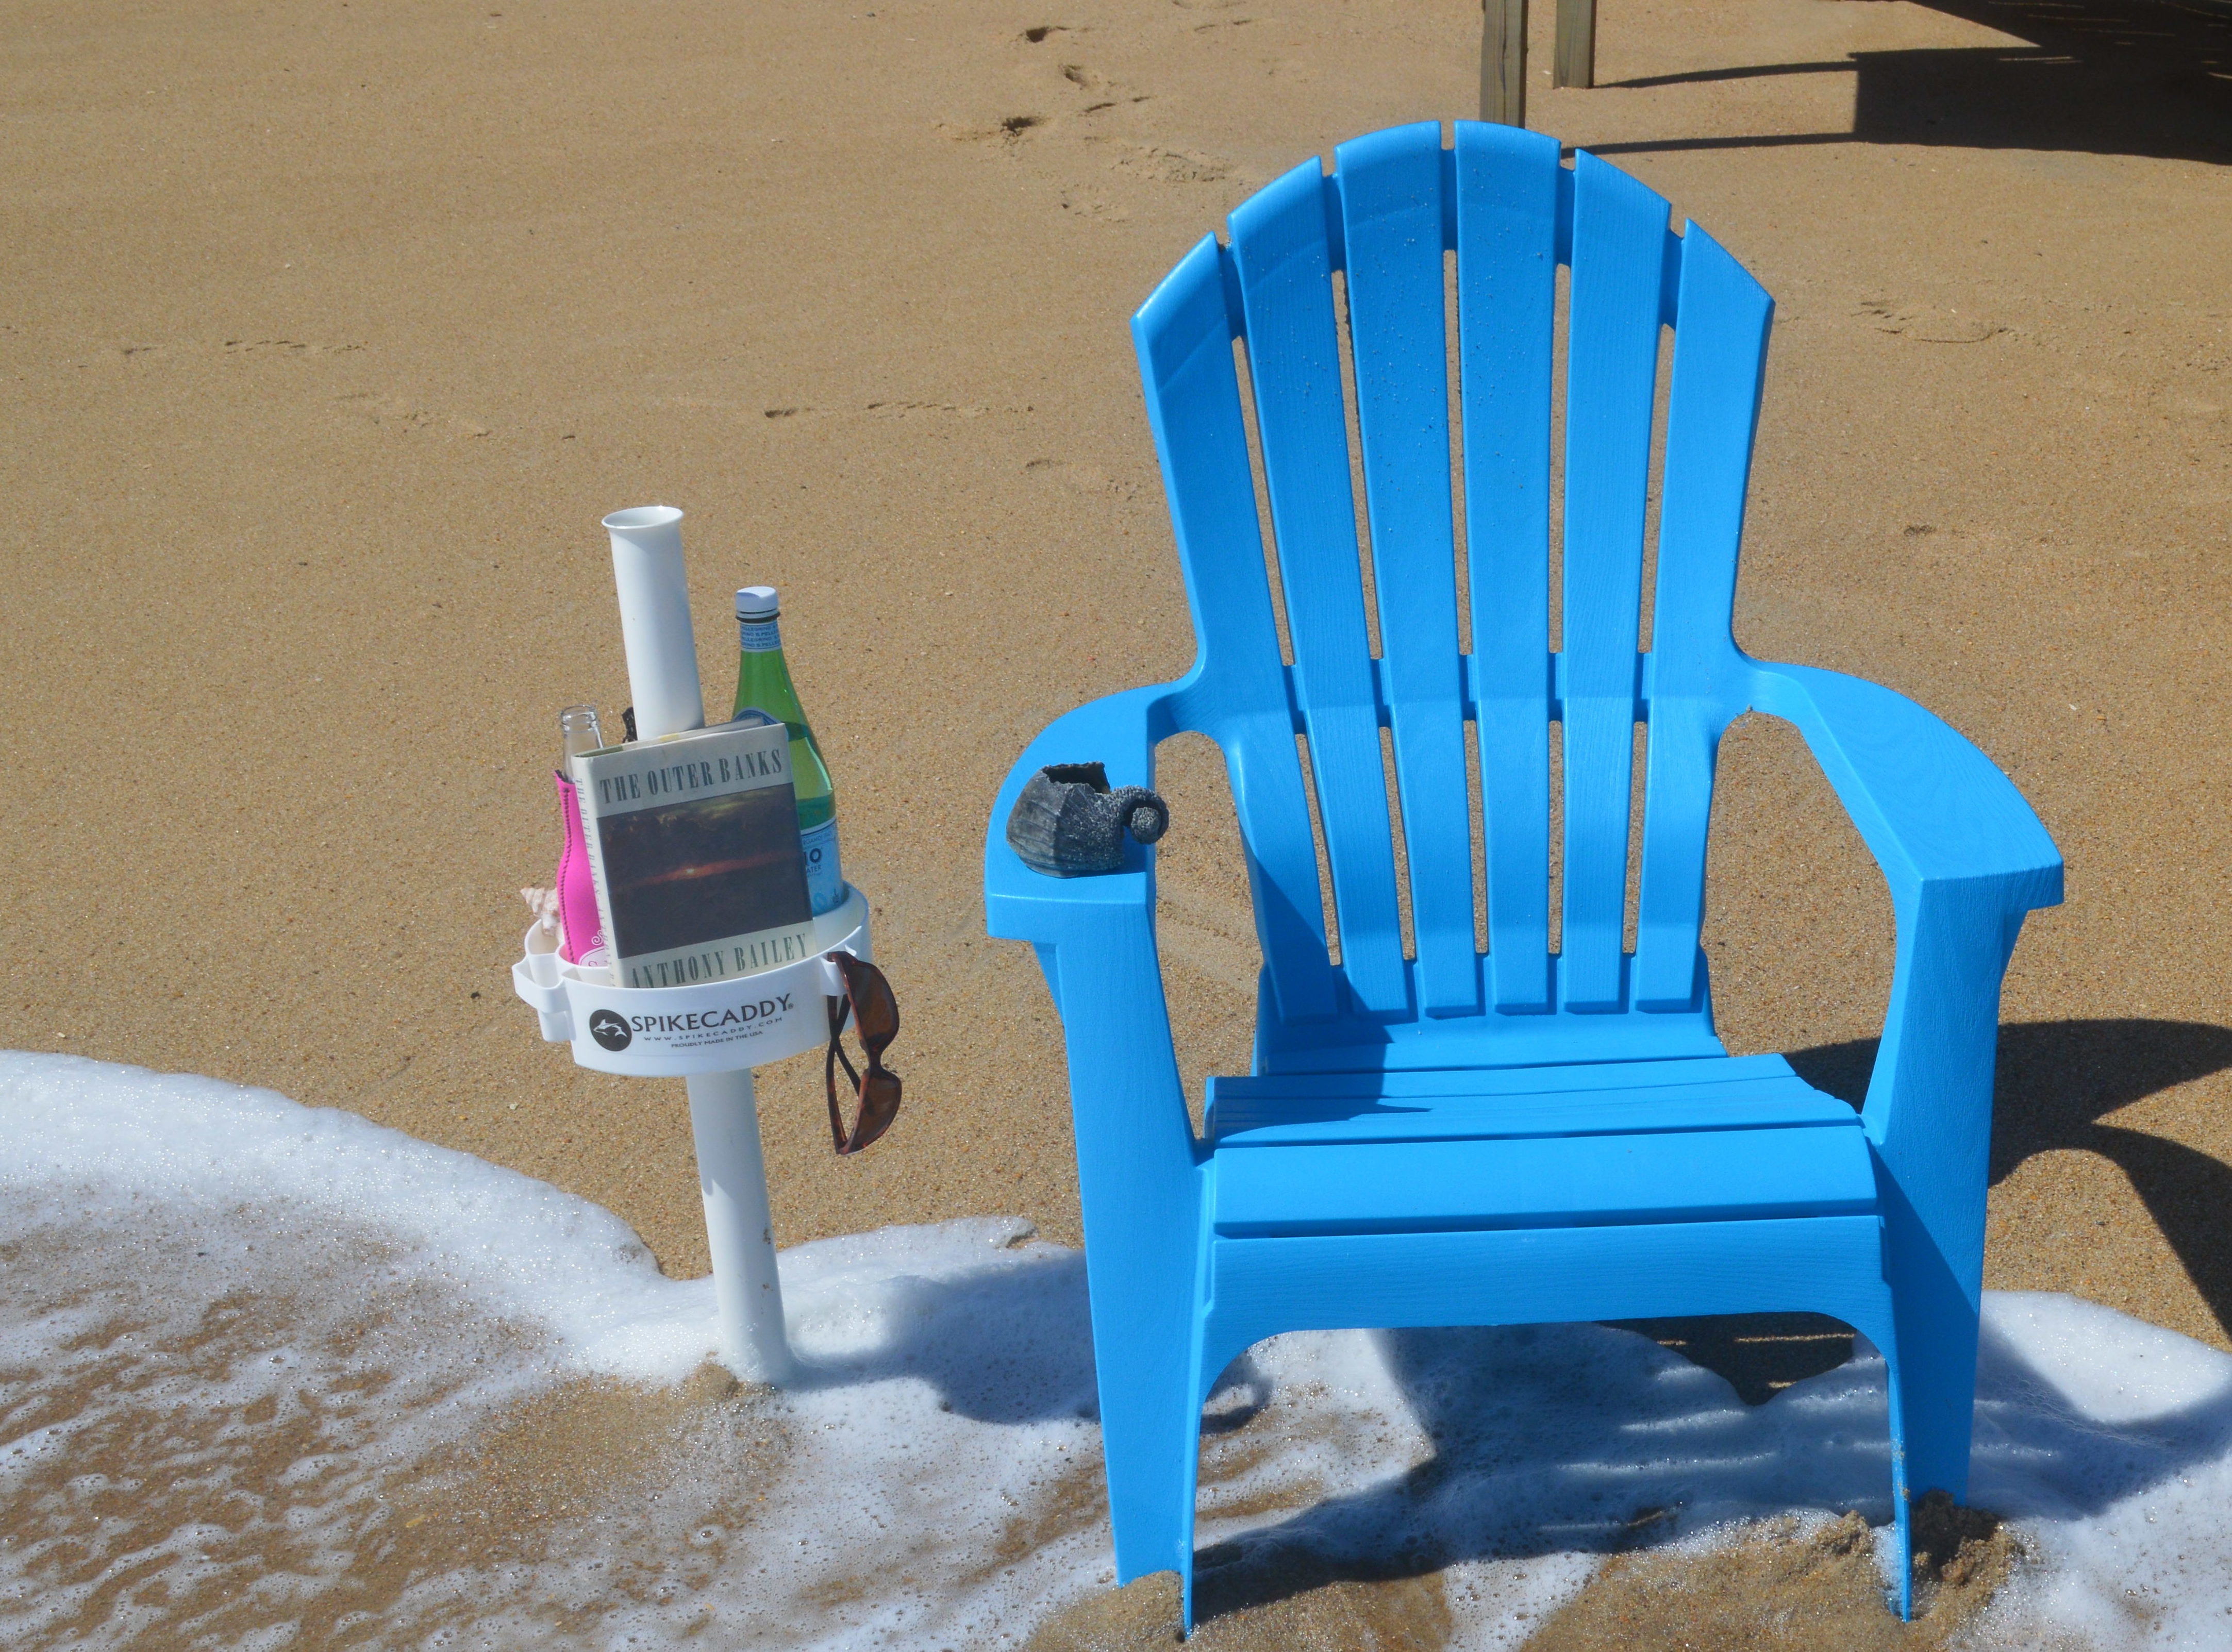 SPIKECADDY keeps your toes in the water and all beach items within arms reach out of the surf and sand! 